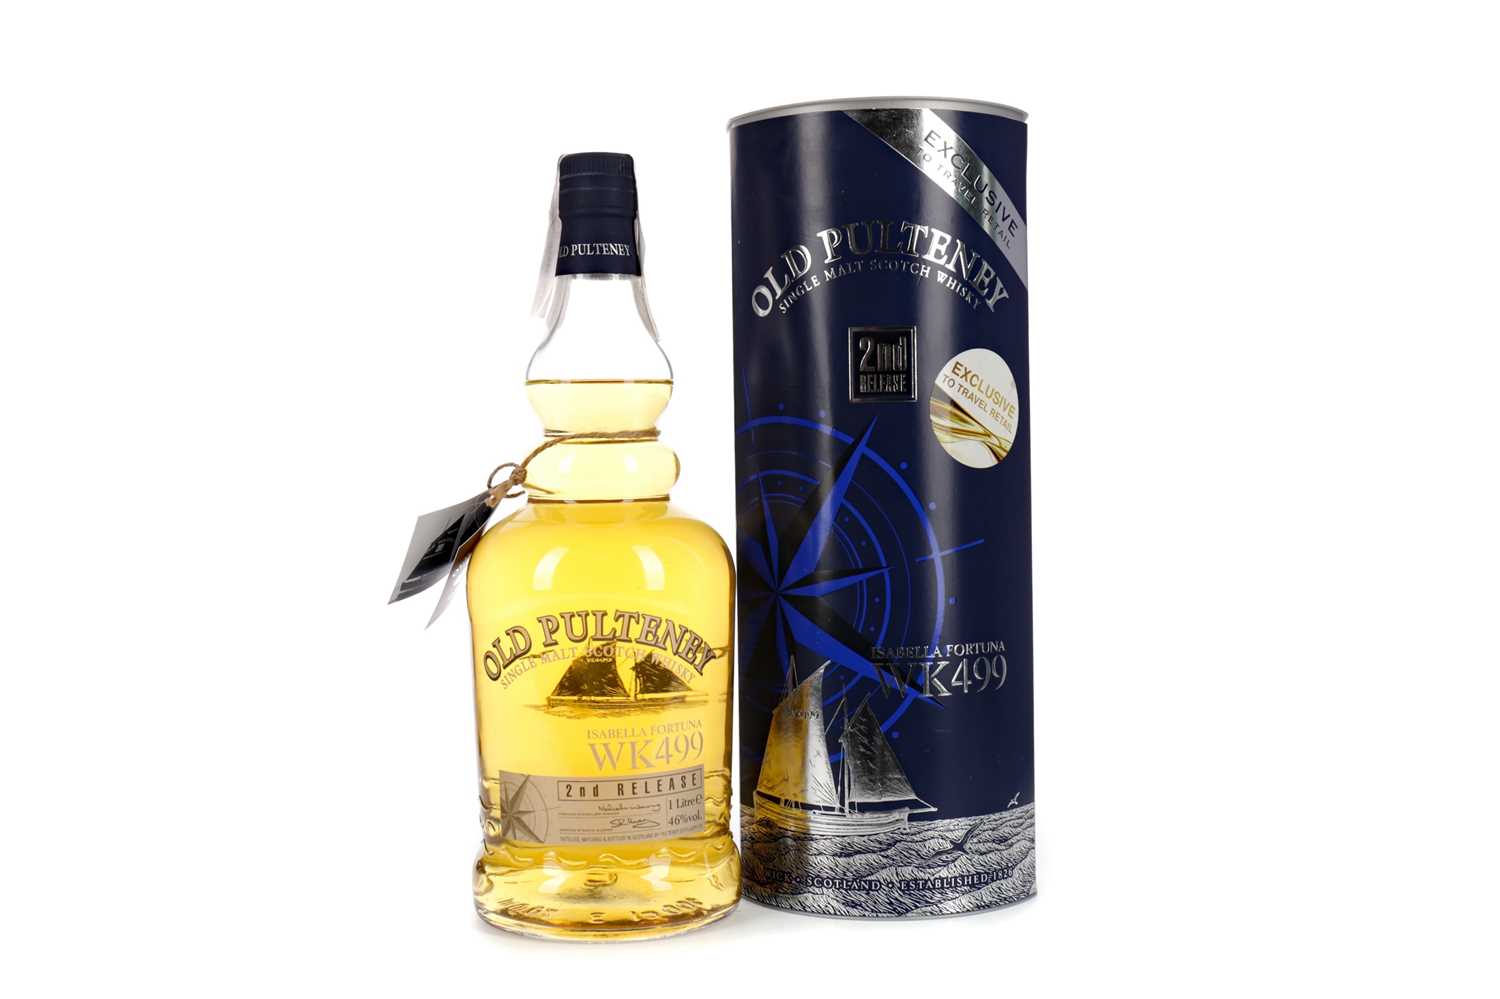 Lot 17 - OLD PULTENEY ISABELLA FORTUNA WK499 SECOND RELEASE - ONE LITRE